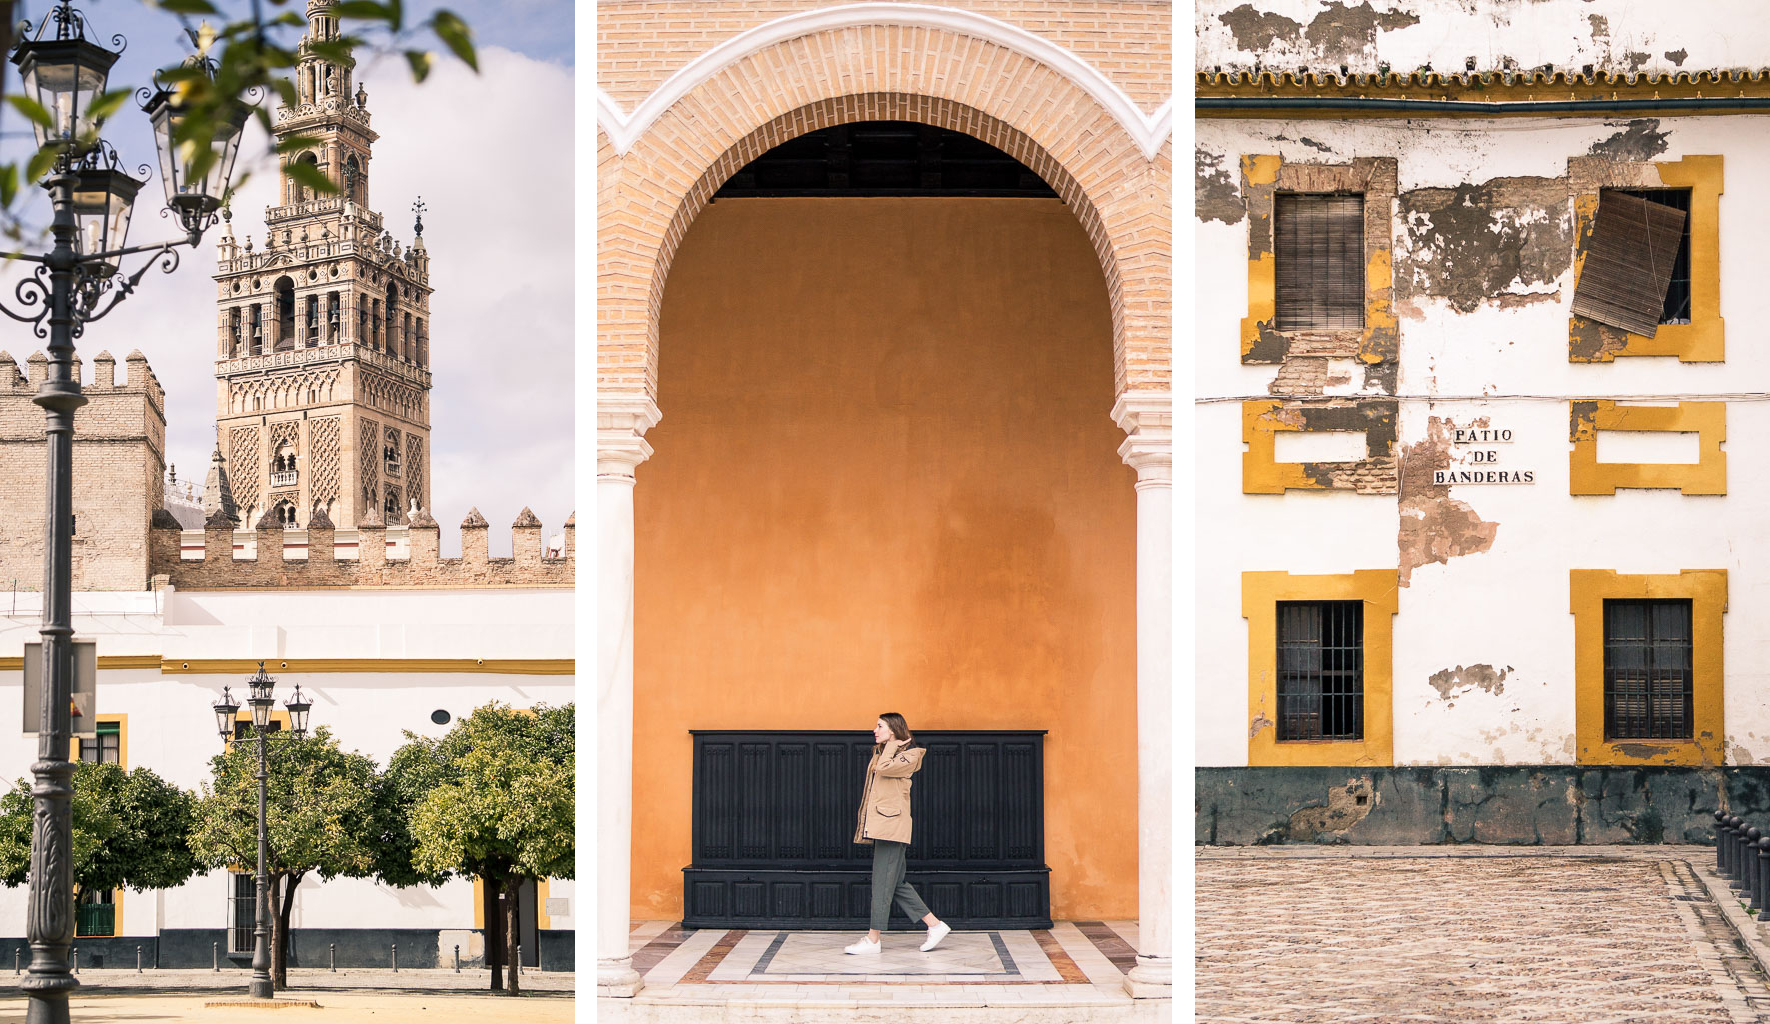 What to do in rainy Seville